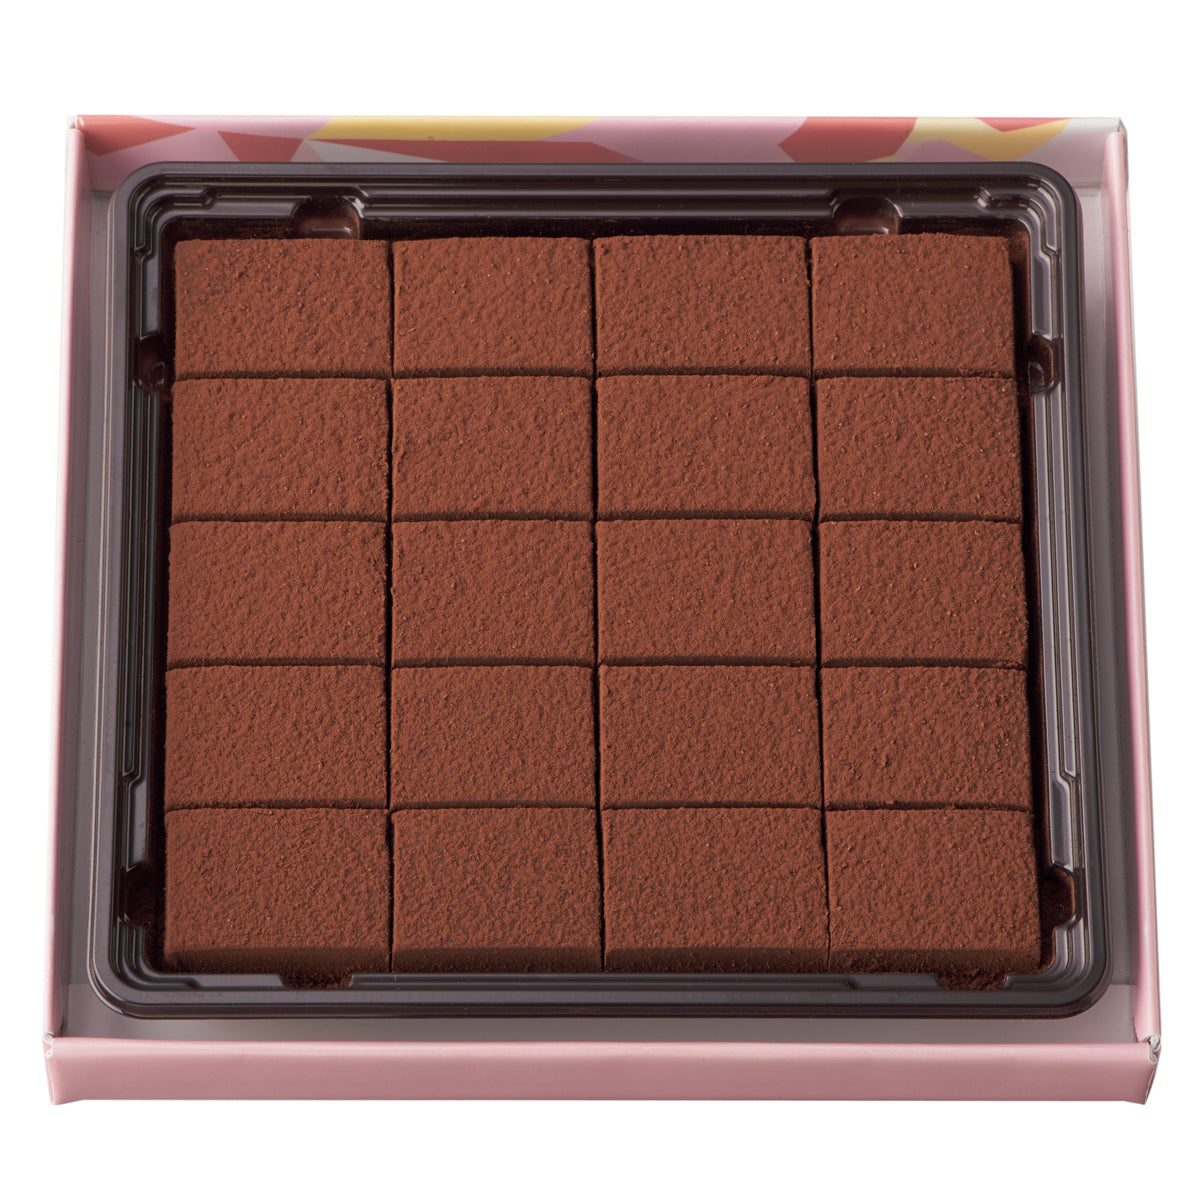 Image shows a box with a tray filled with brown chocolate blocks. 